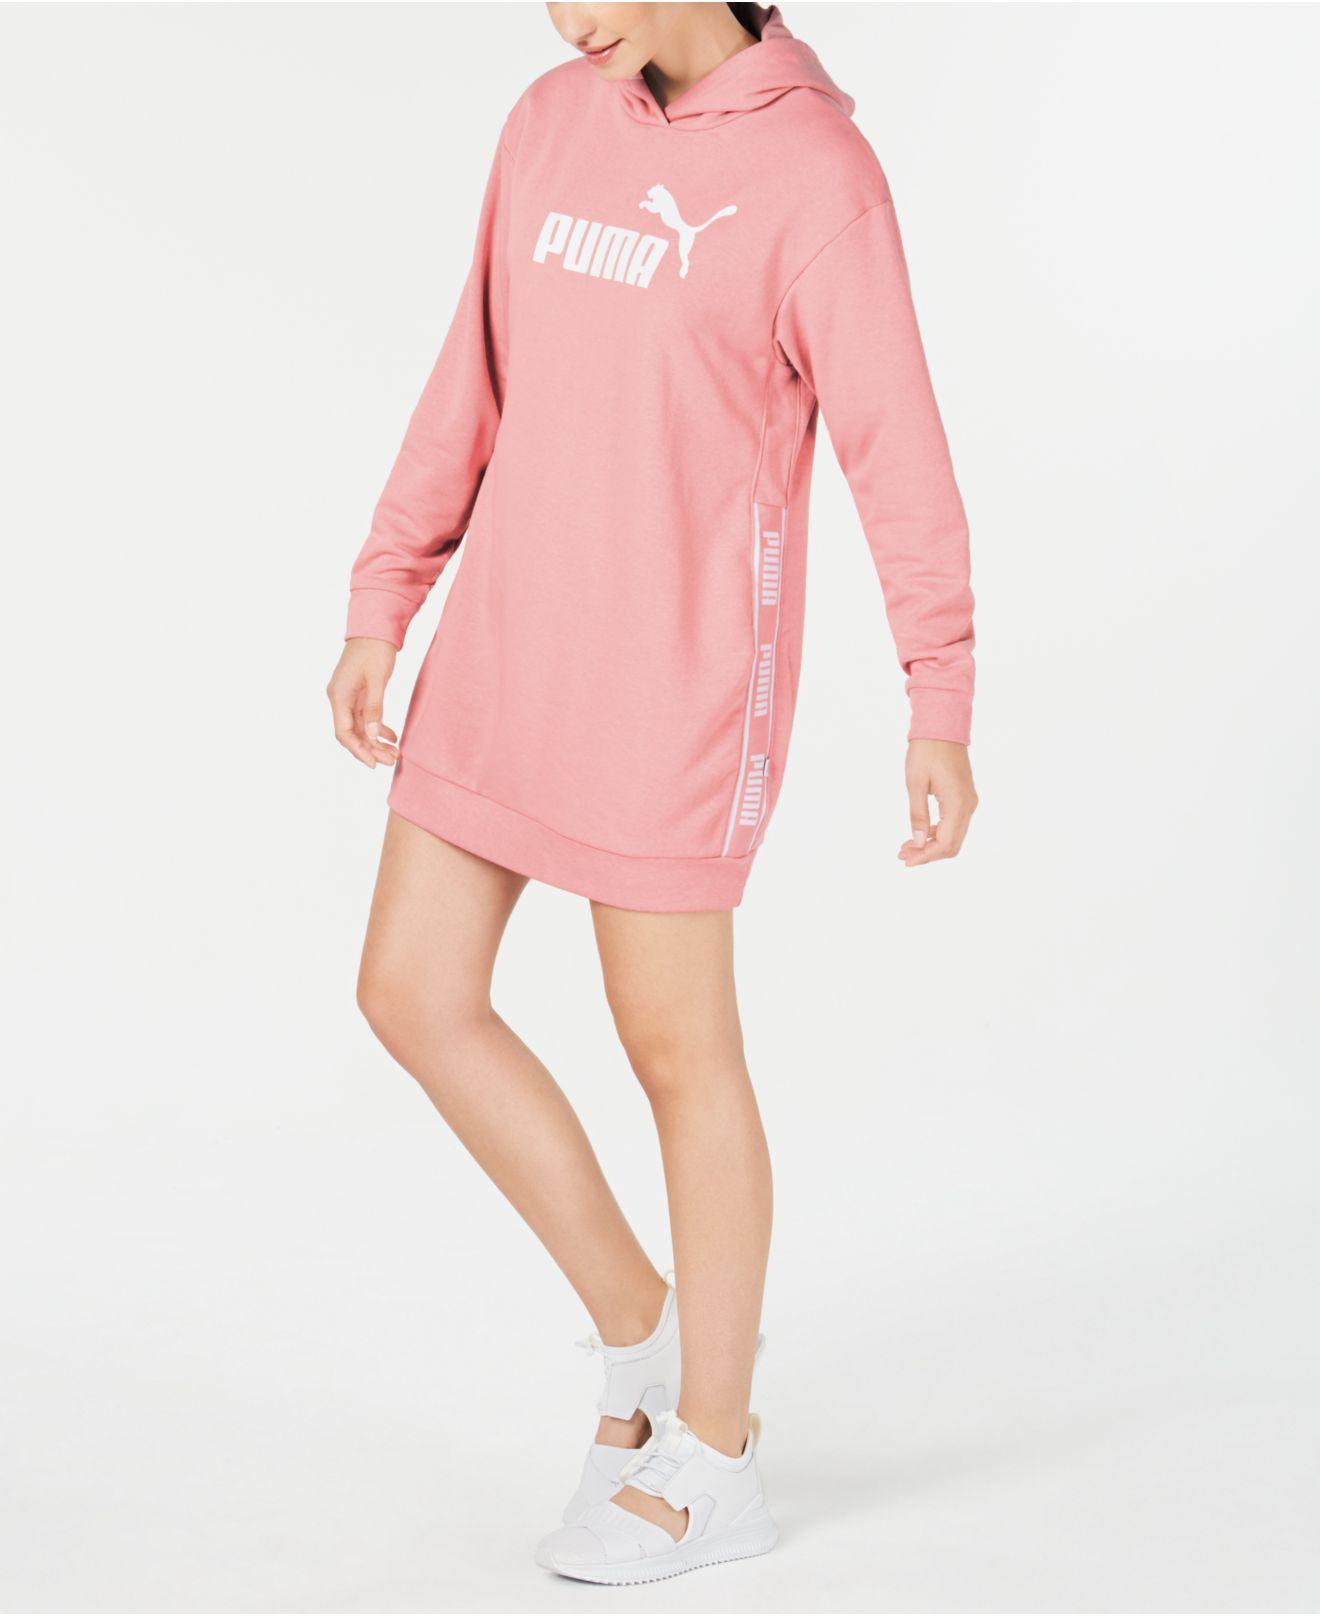 PUMA Cotton Amplified Hoodie Dress in Pink | Lyst